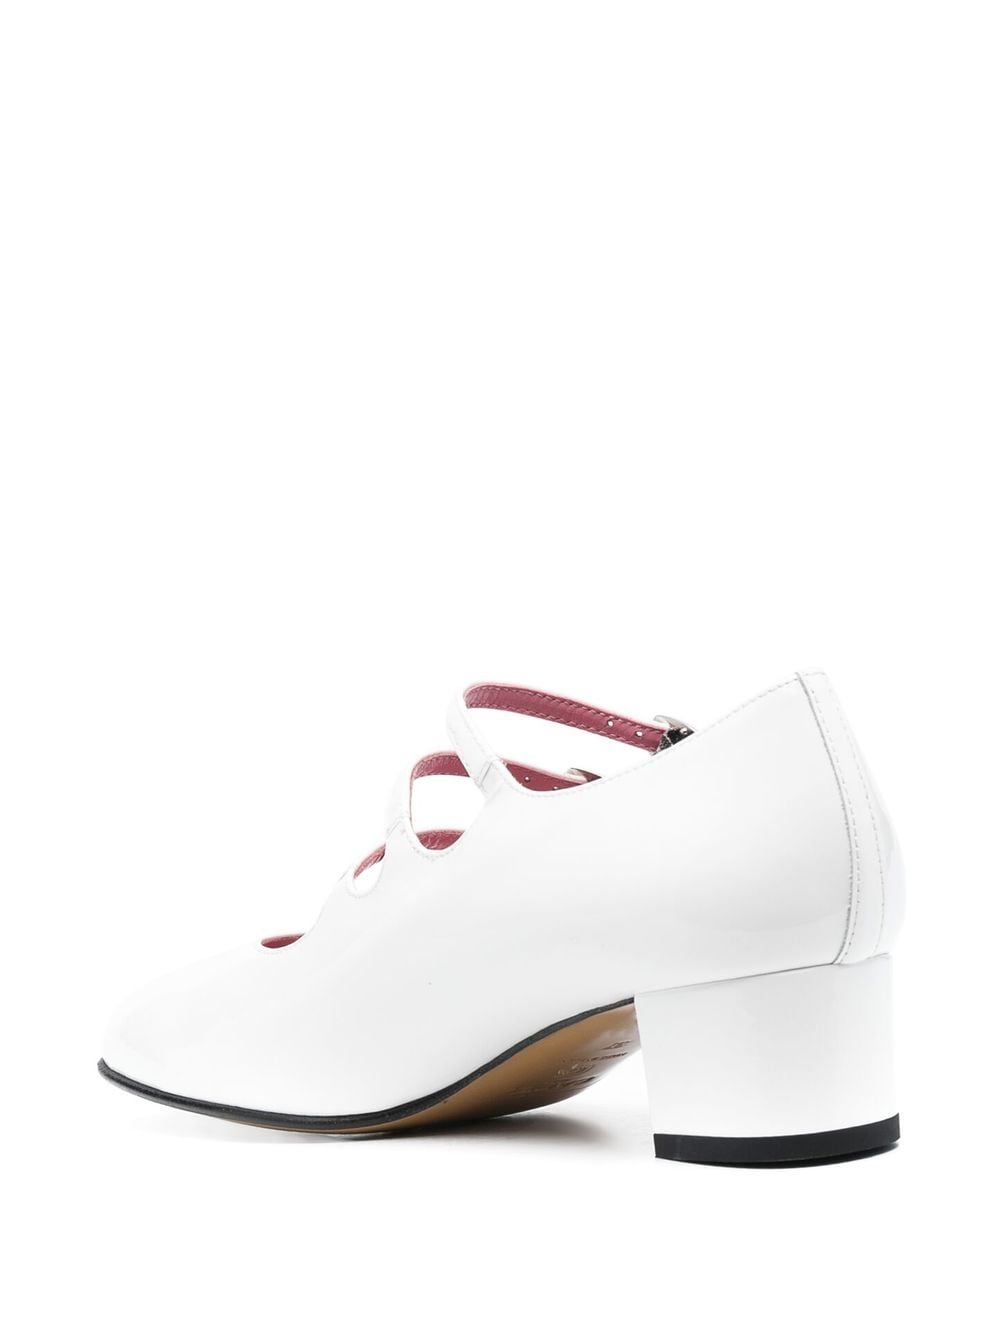 Shop Carel Paris Kina 40mm Patent Leather Pumps In Weiss